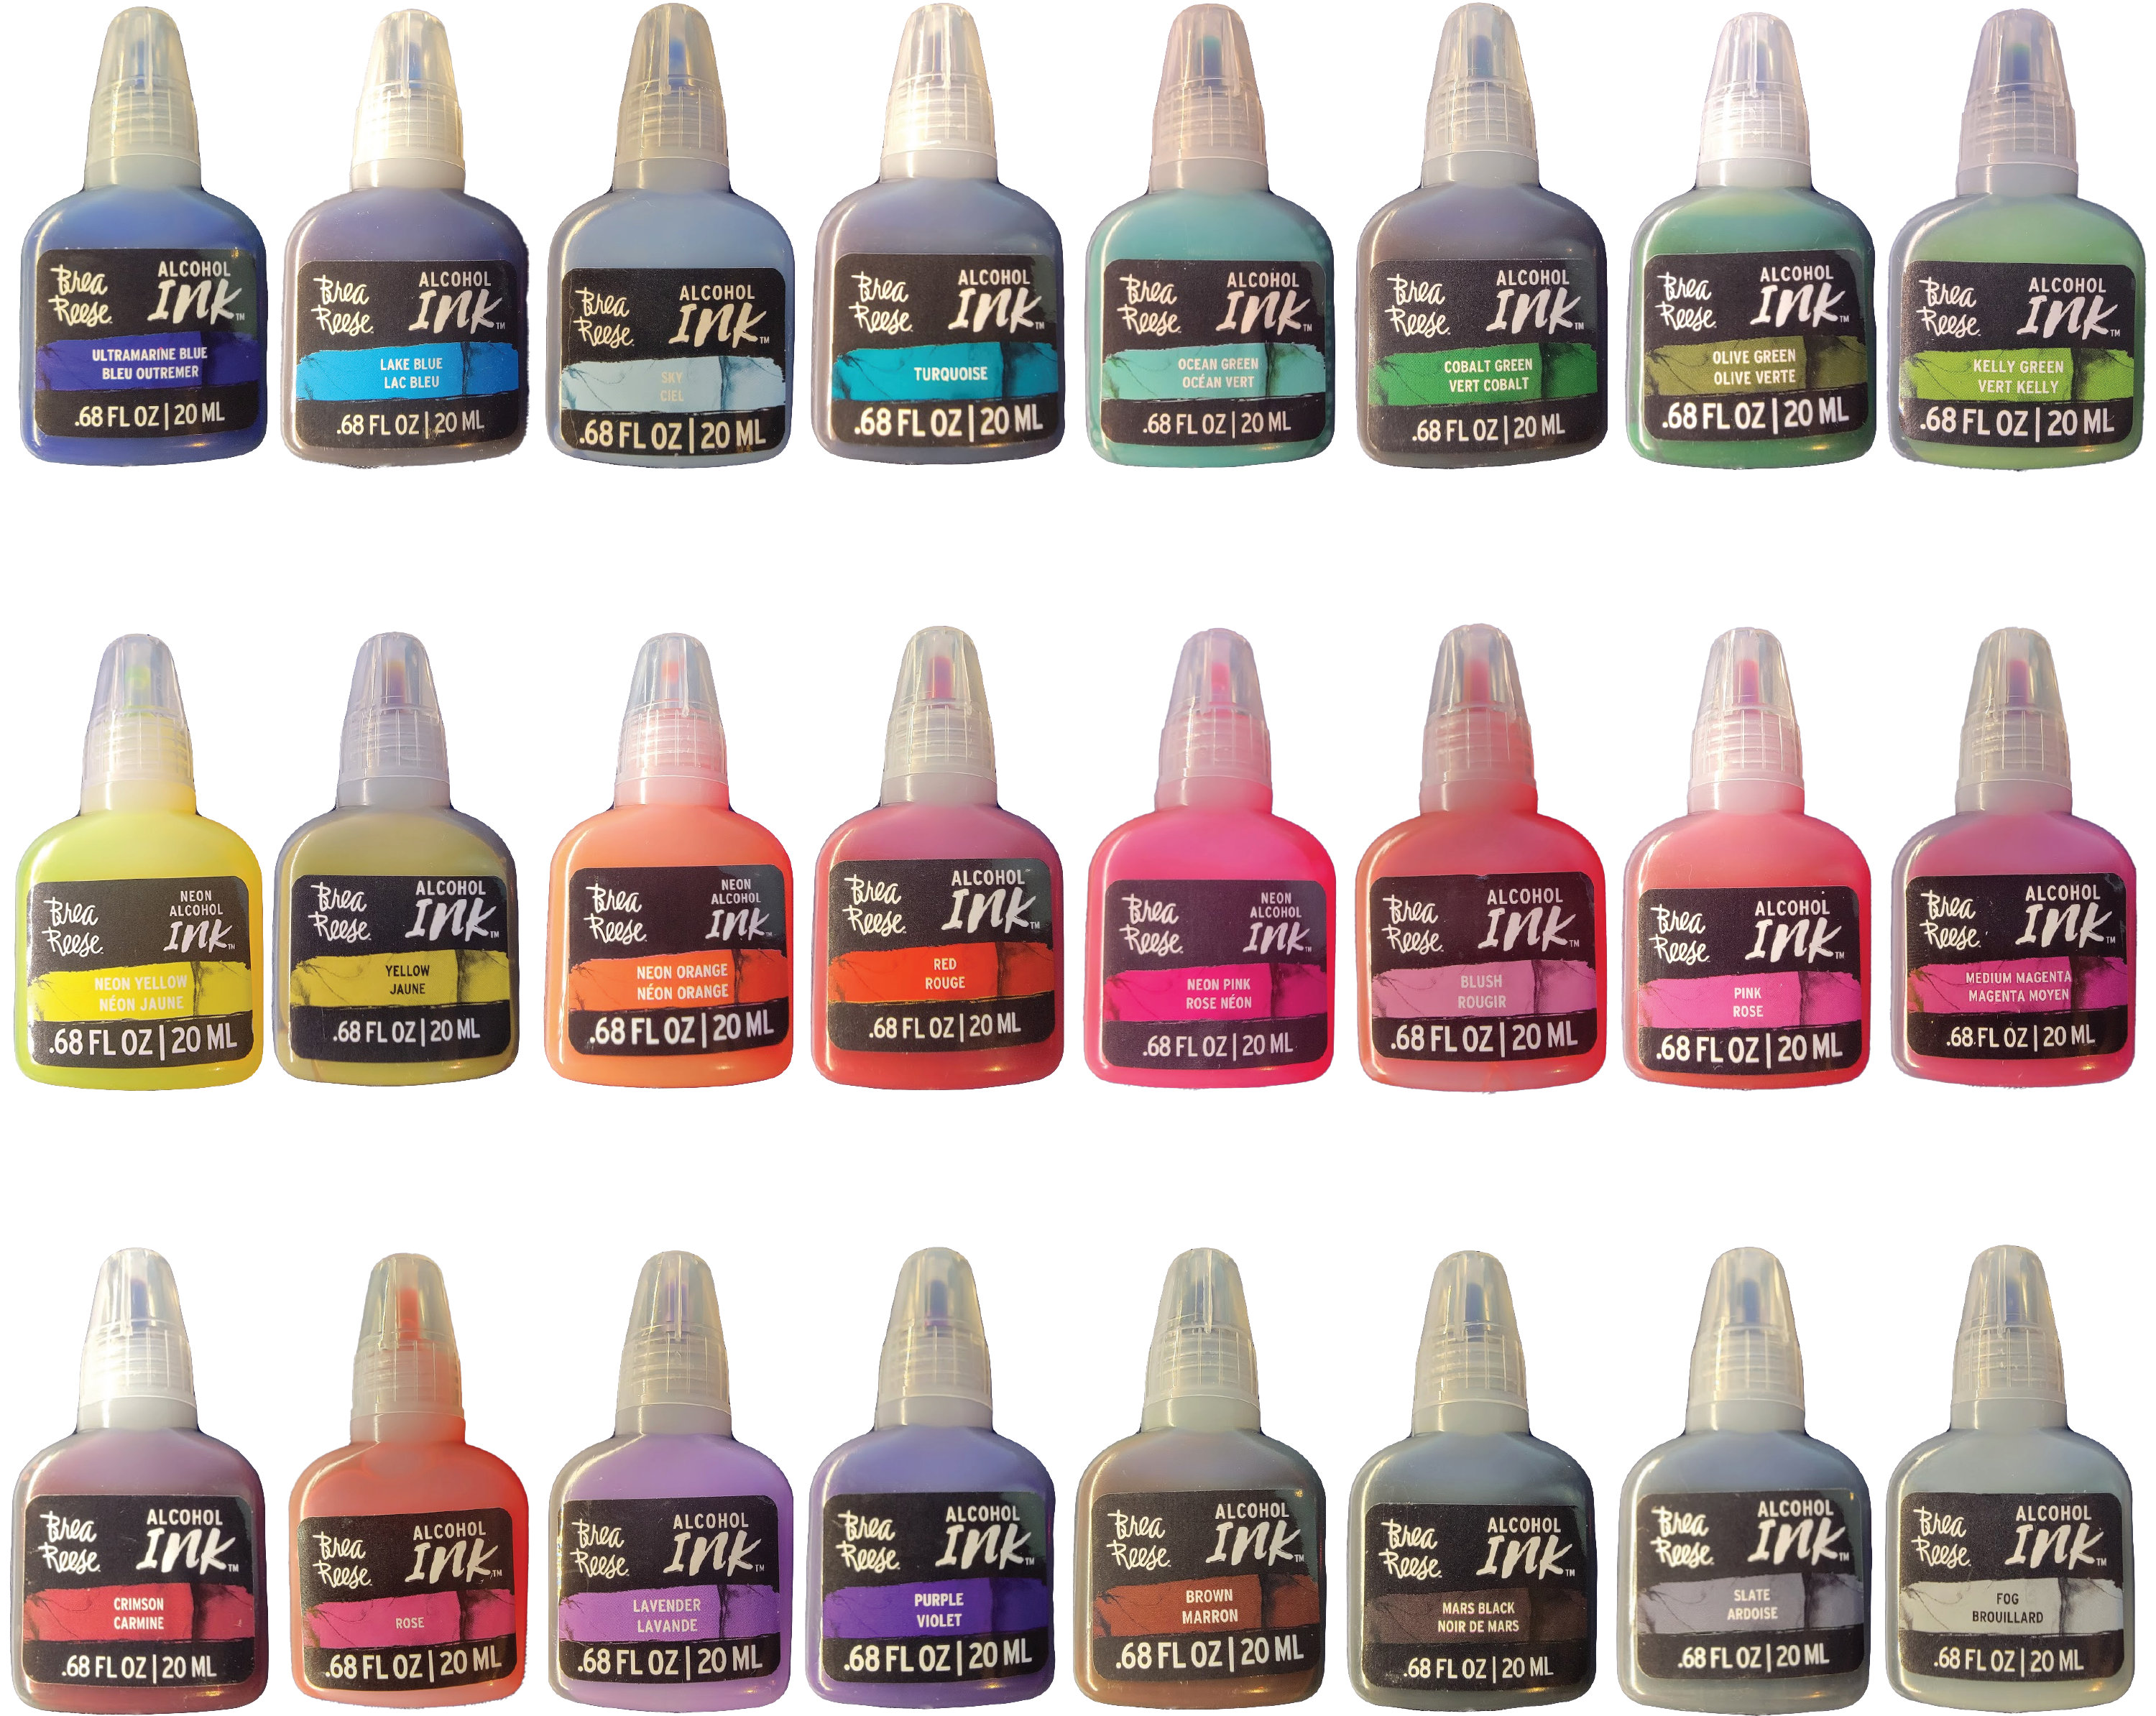 Vibrant Alcohol Inks Set Artresin 8 Color Pack for Stunning Art Projects  and Resin Artwork 